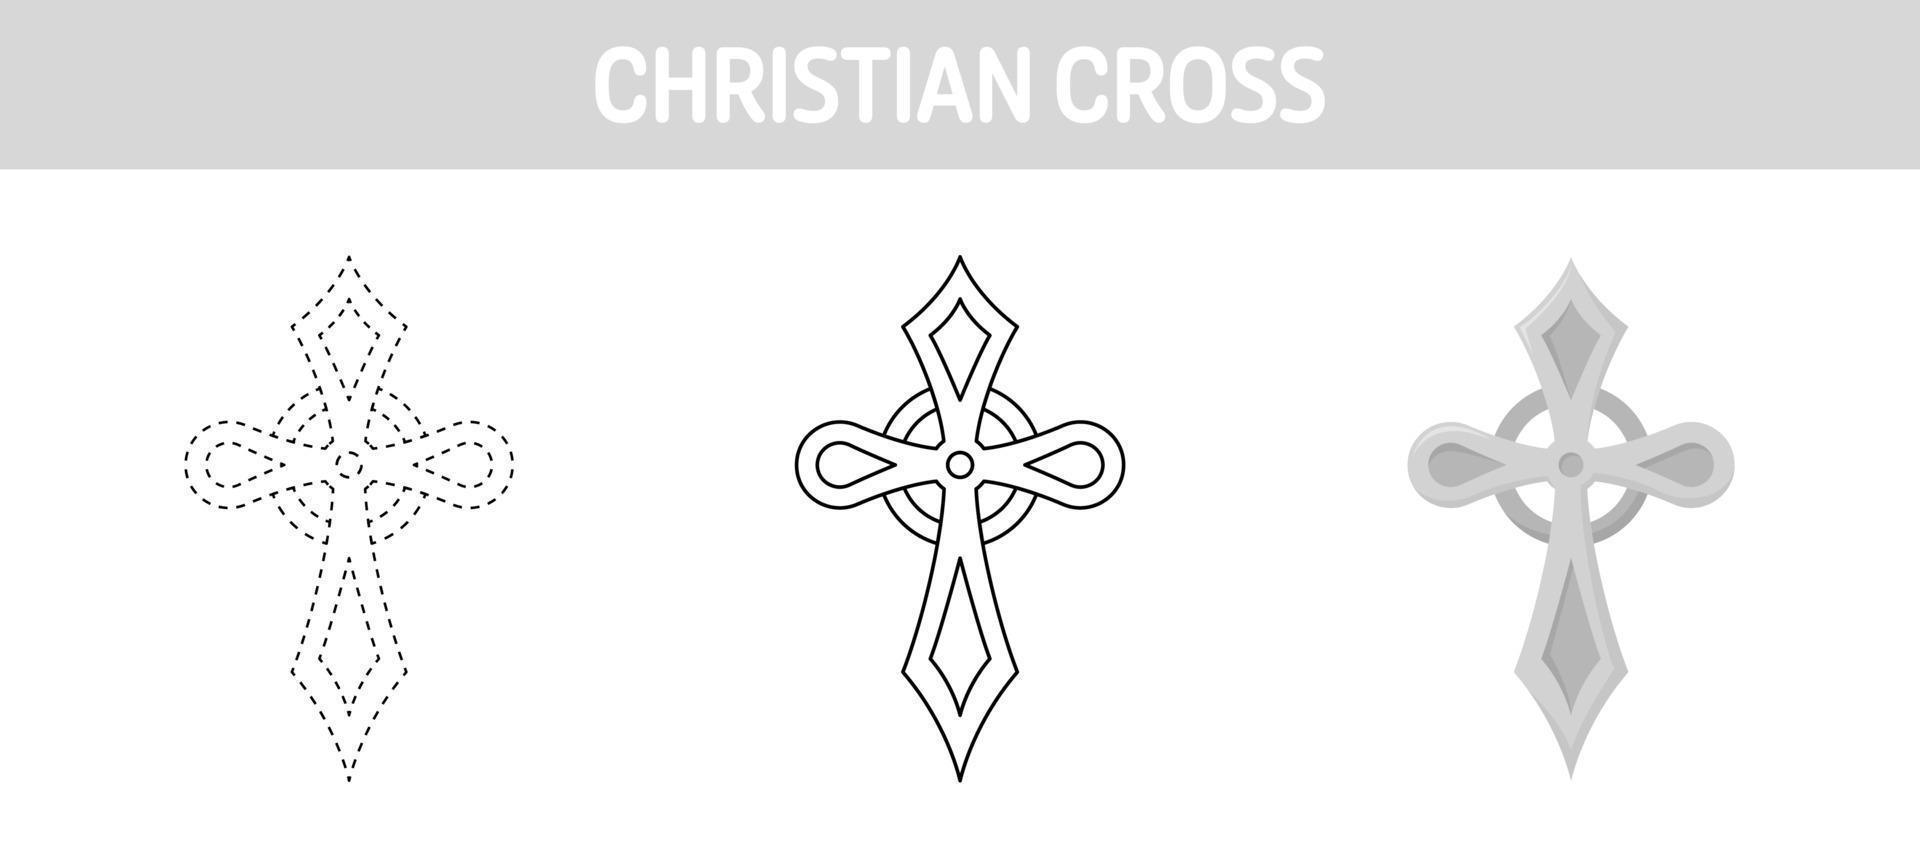 Christian Cross tracing and coloring worksheet for kids vector